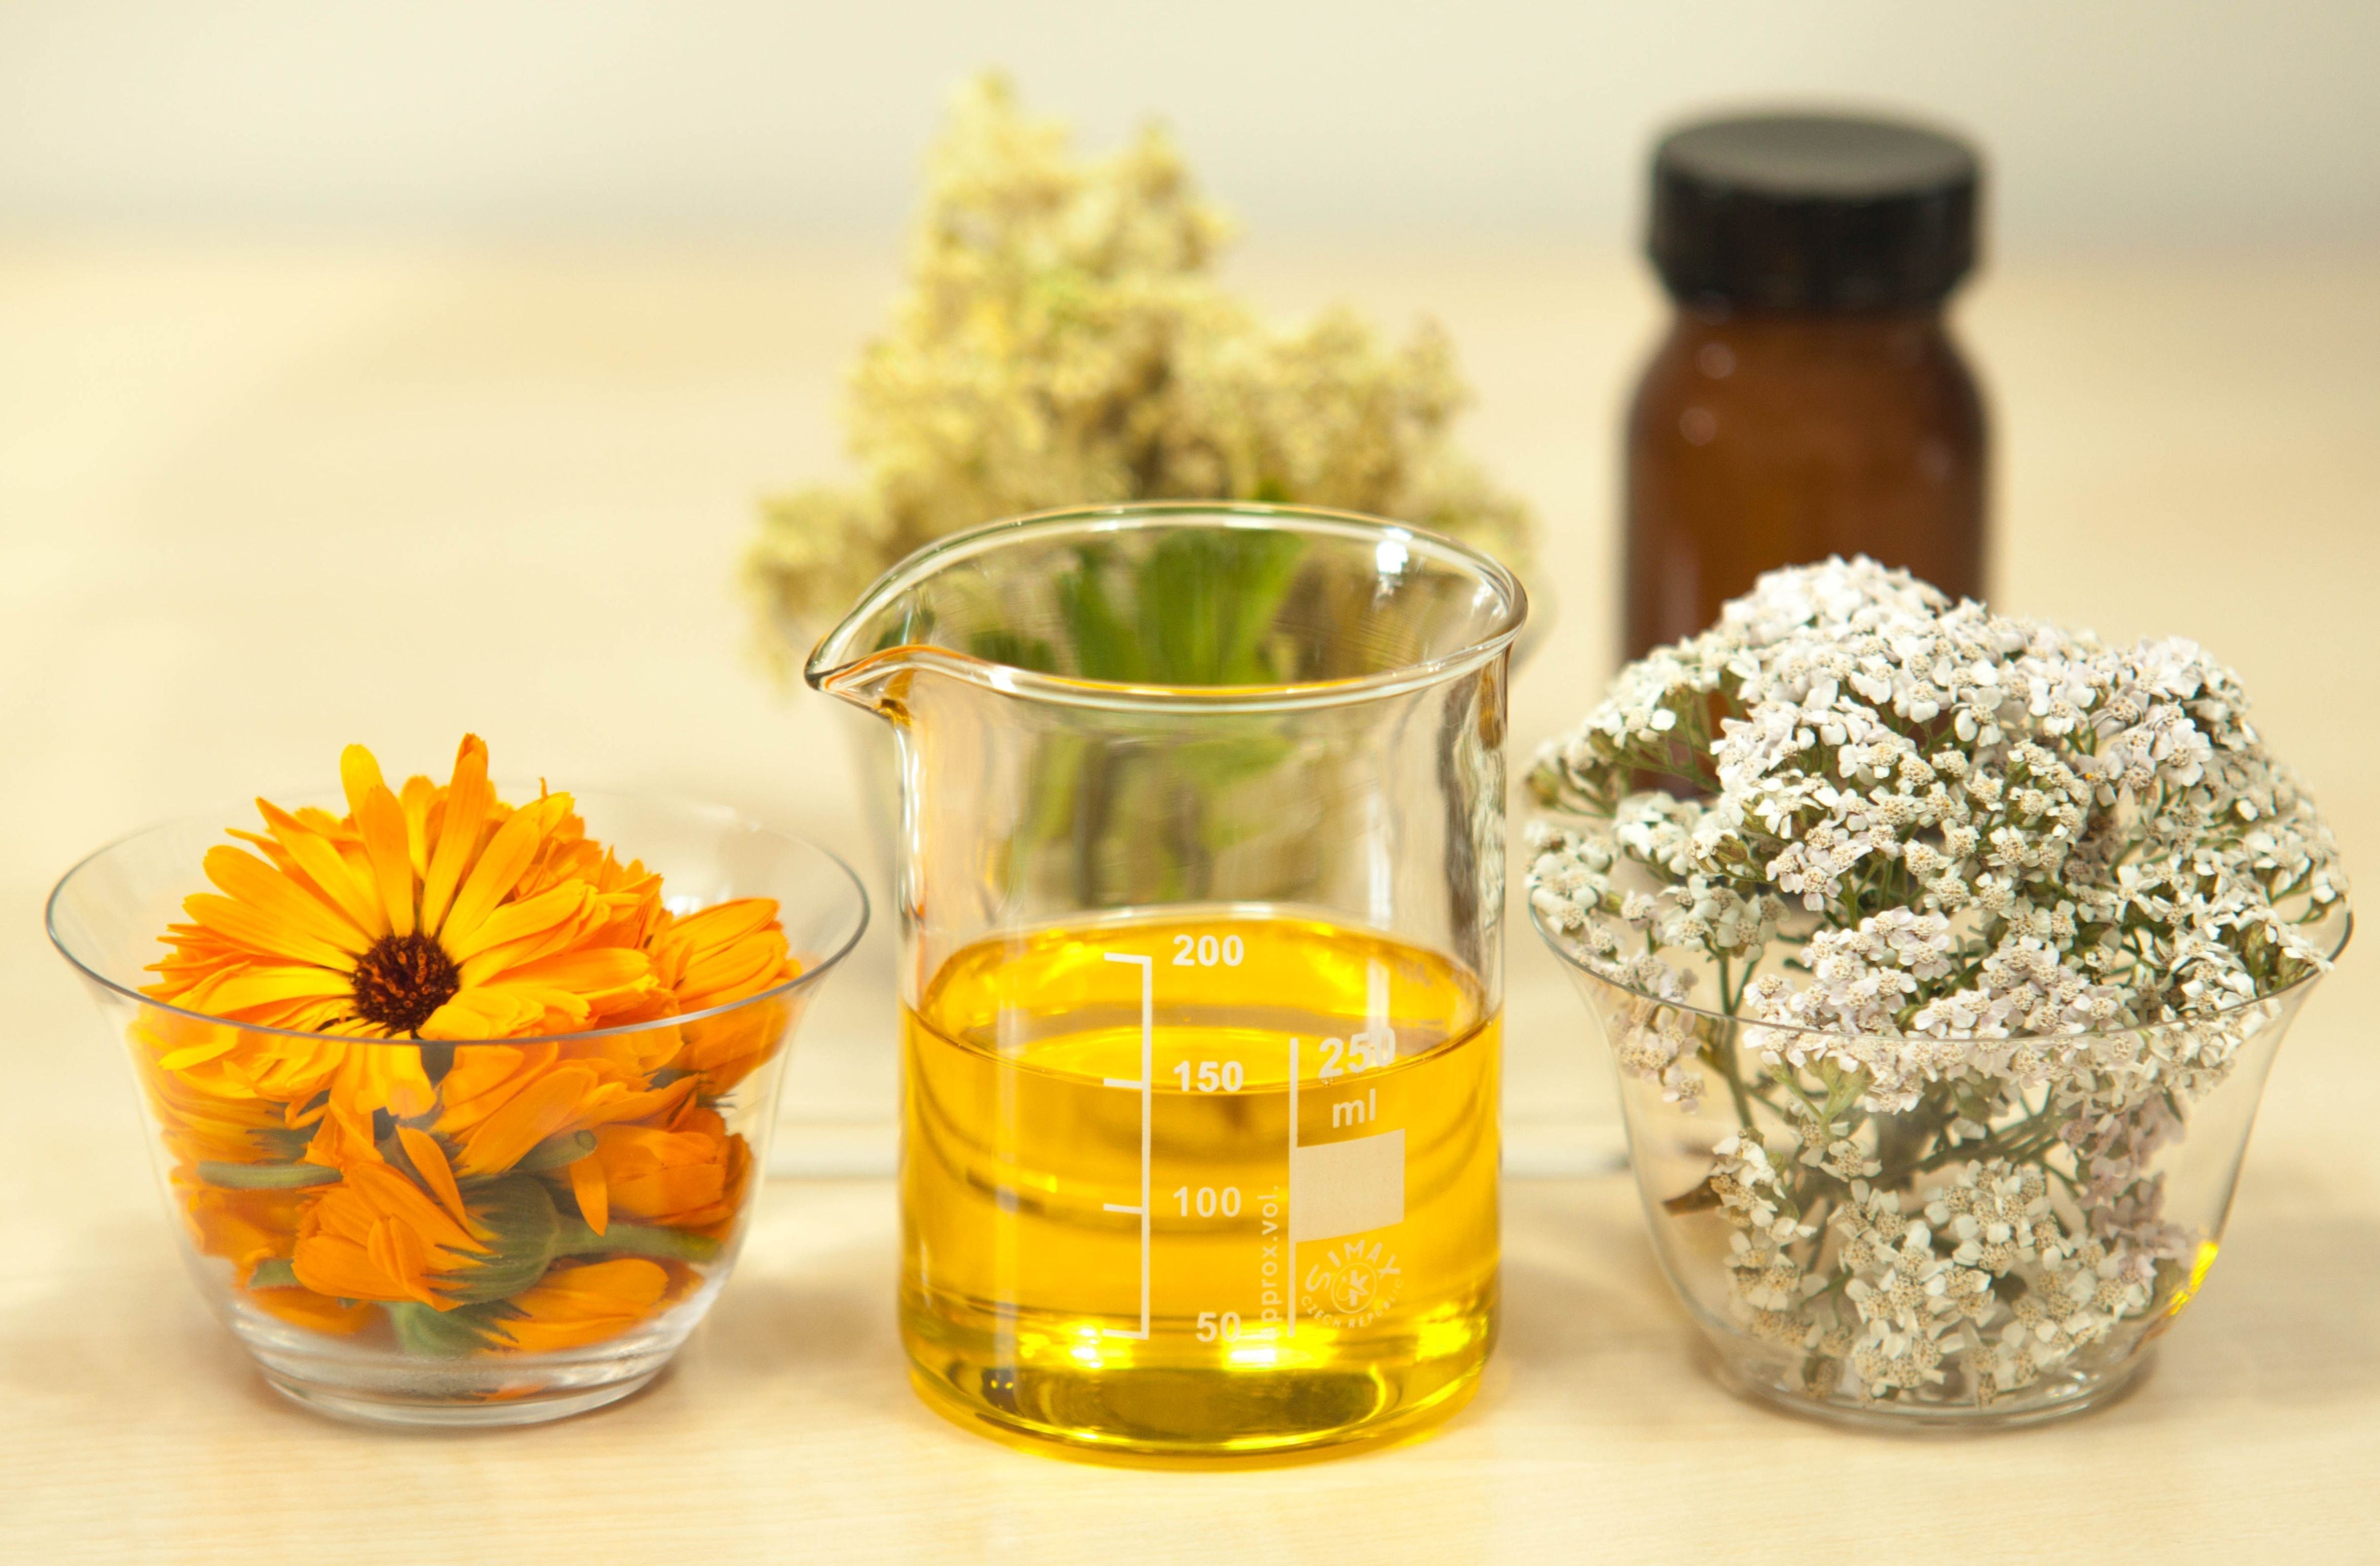 Essential Oils VS Carrier Oils: What's The Difference?